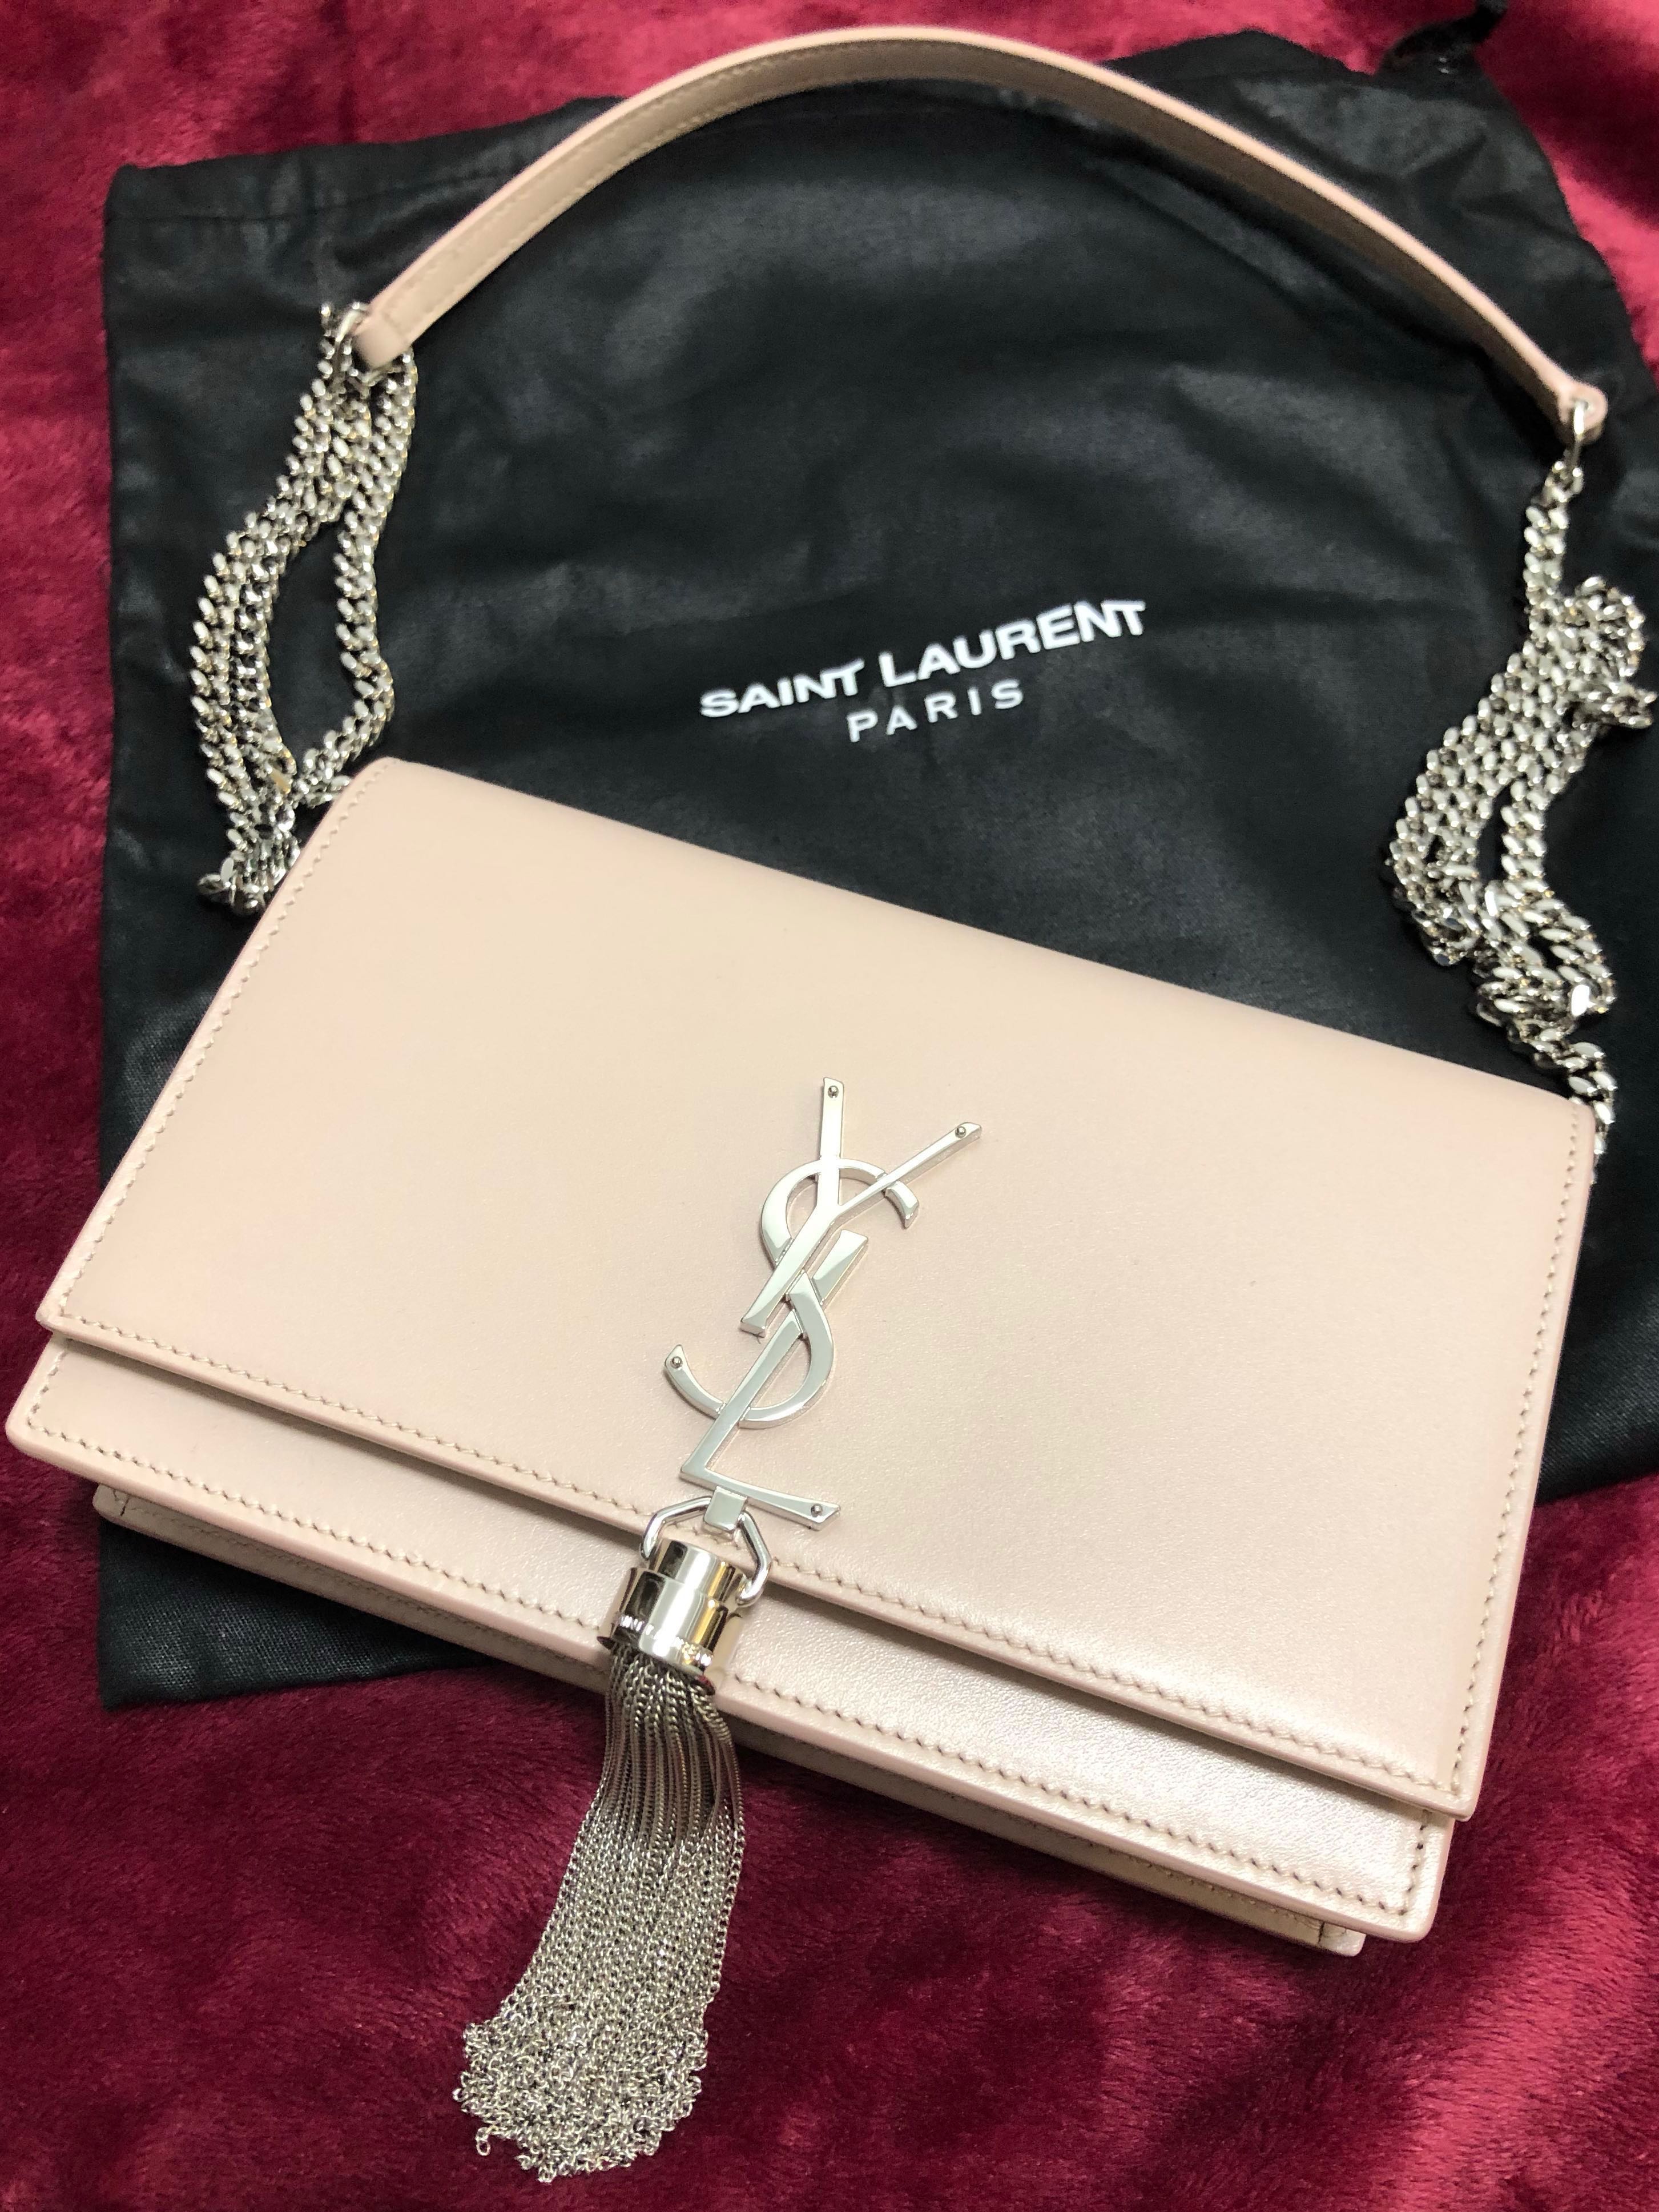 ysl kate chain wallet with tassel